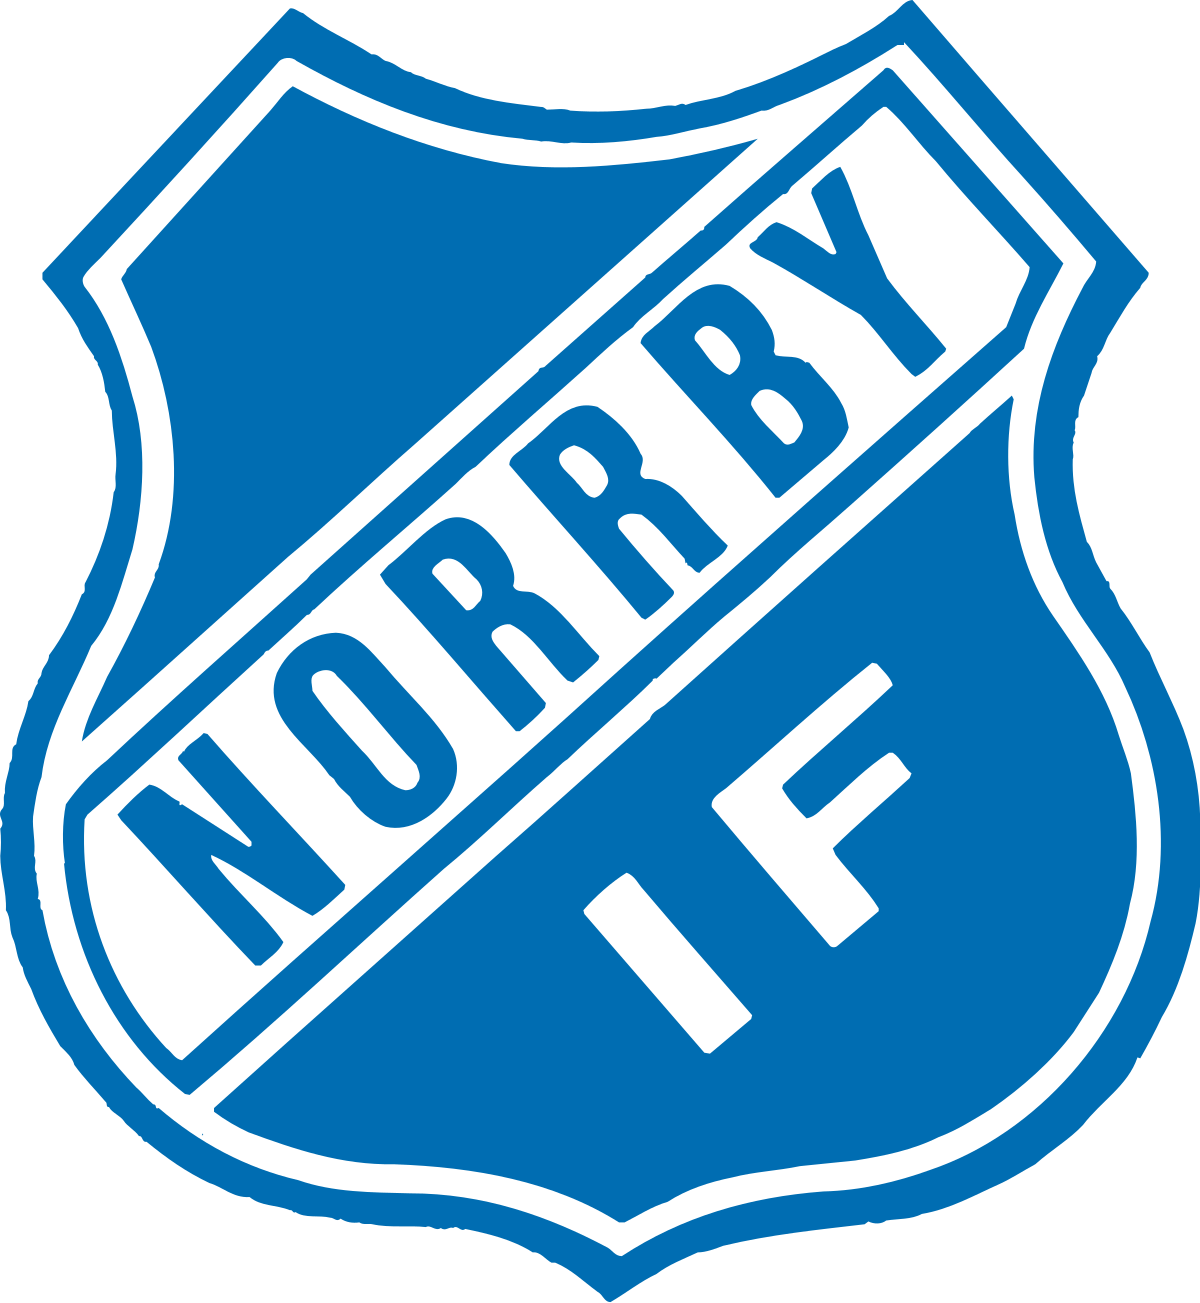 Wappen Norrby IF diverse 